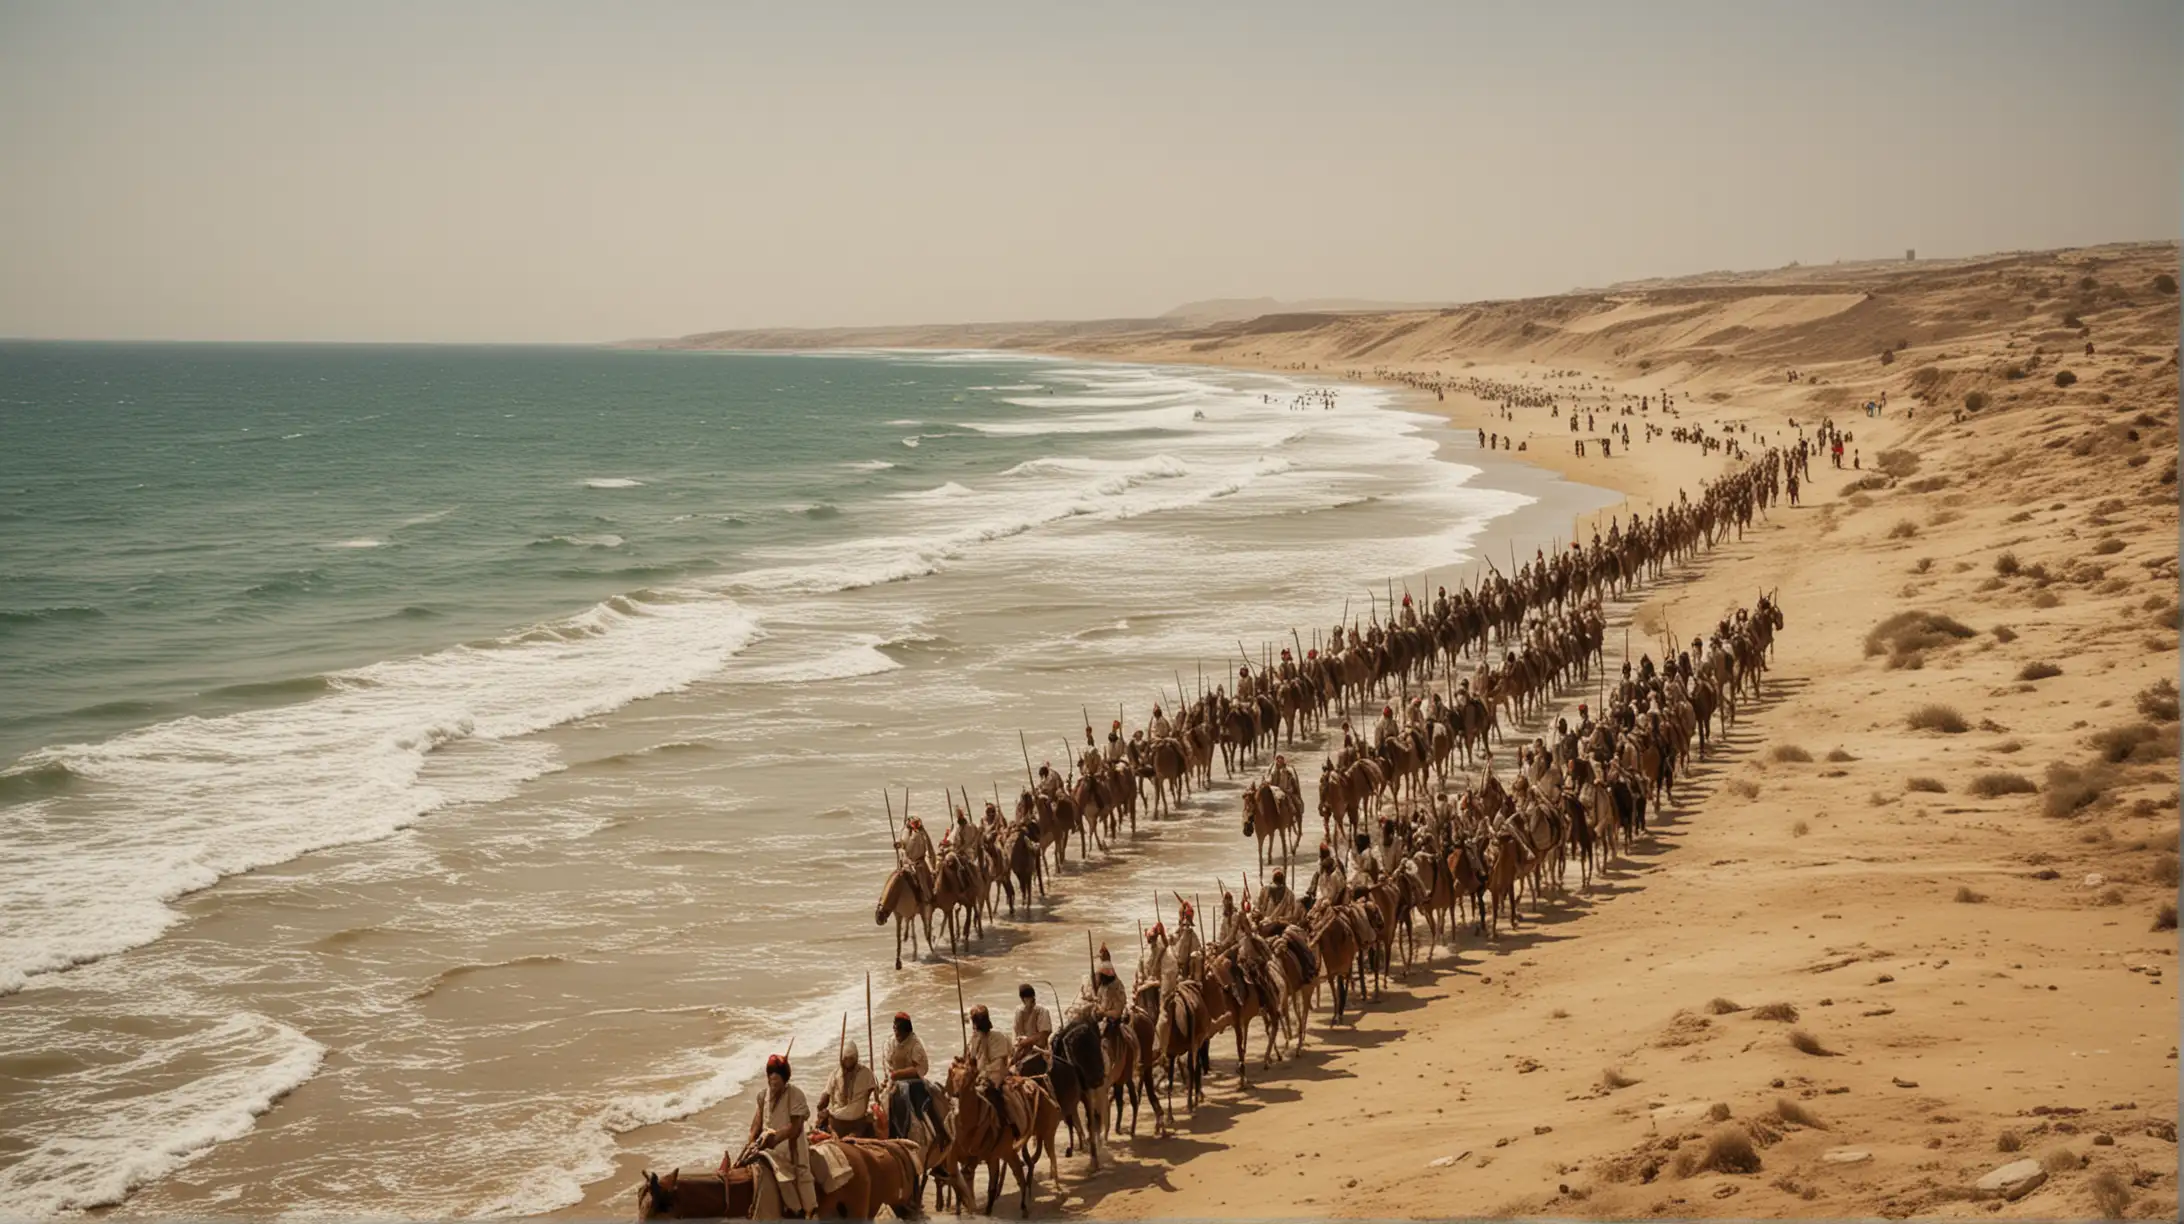 Exodus Israelites Crossing the Divided Sea with Pharaohs Army in Pursuit